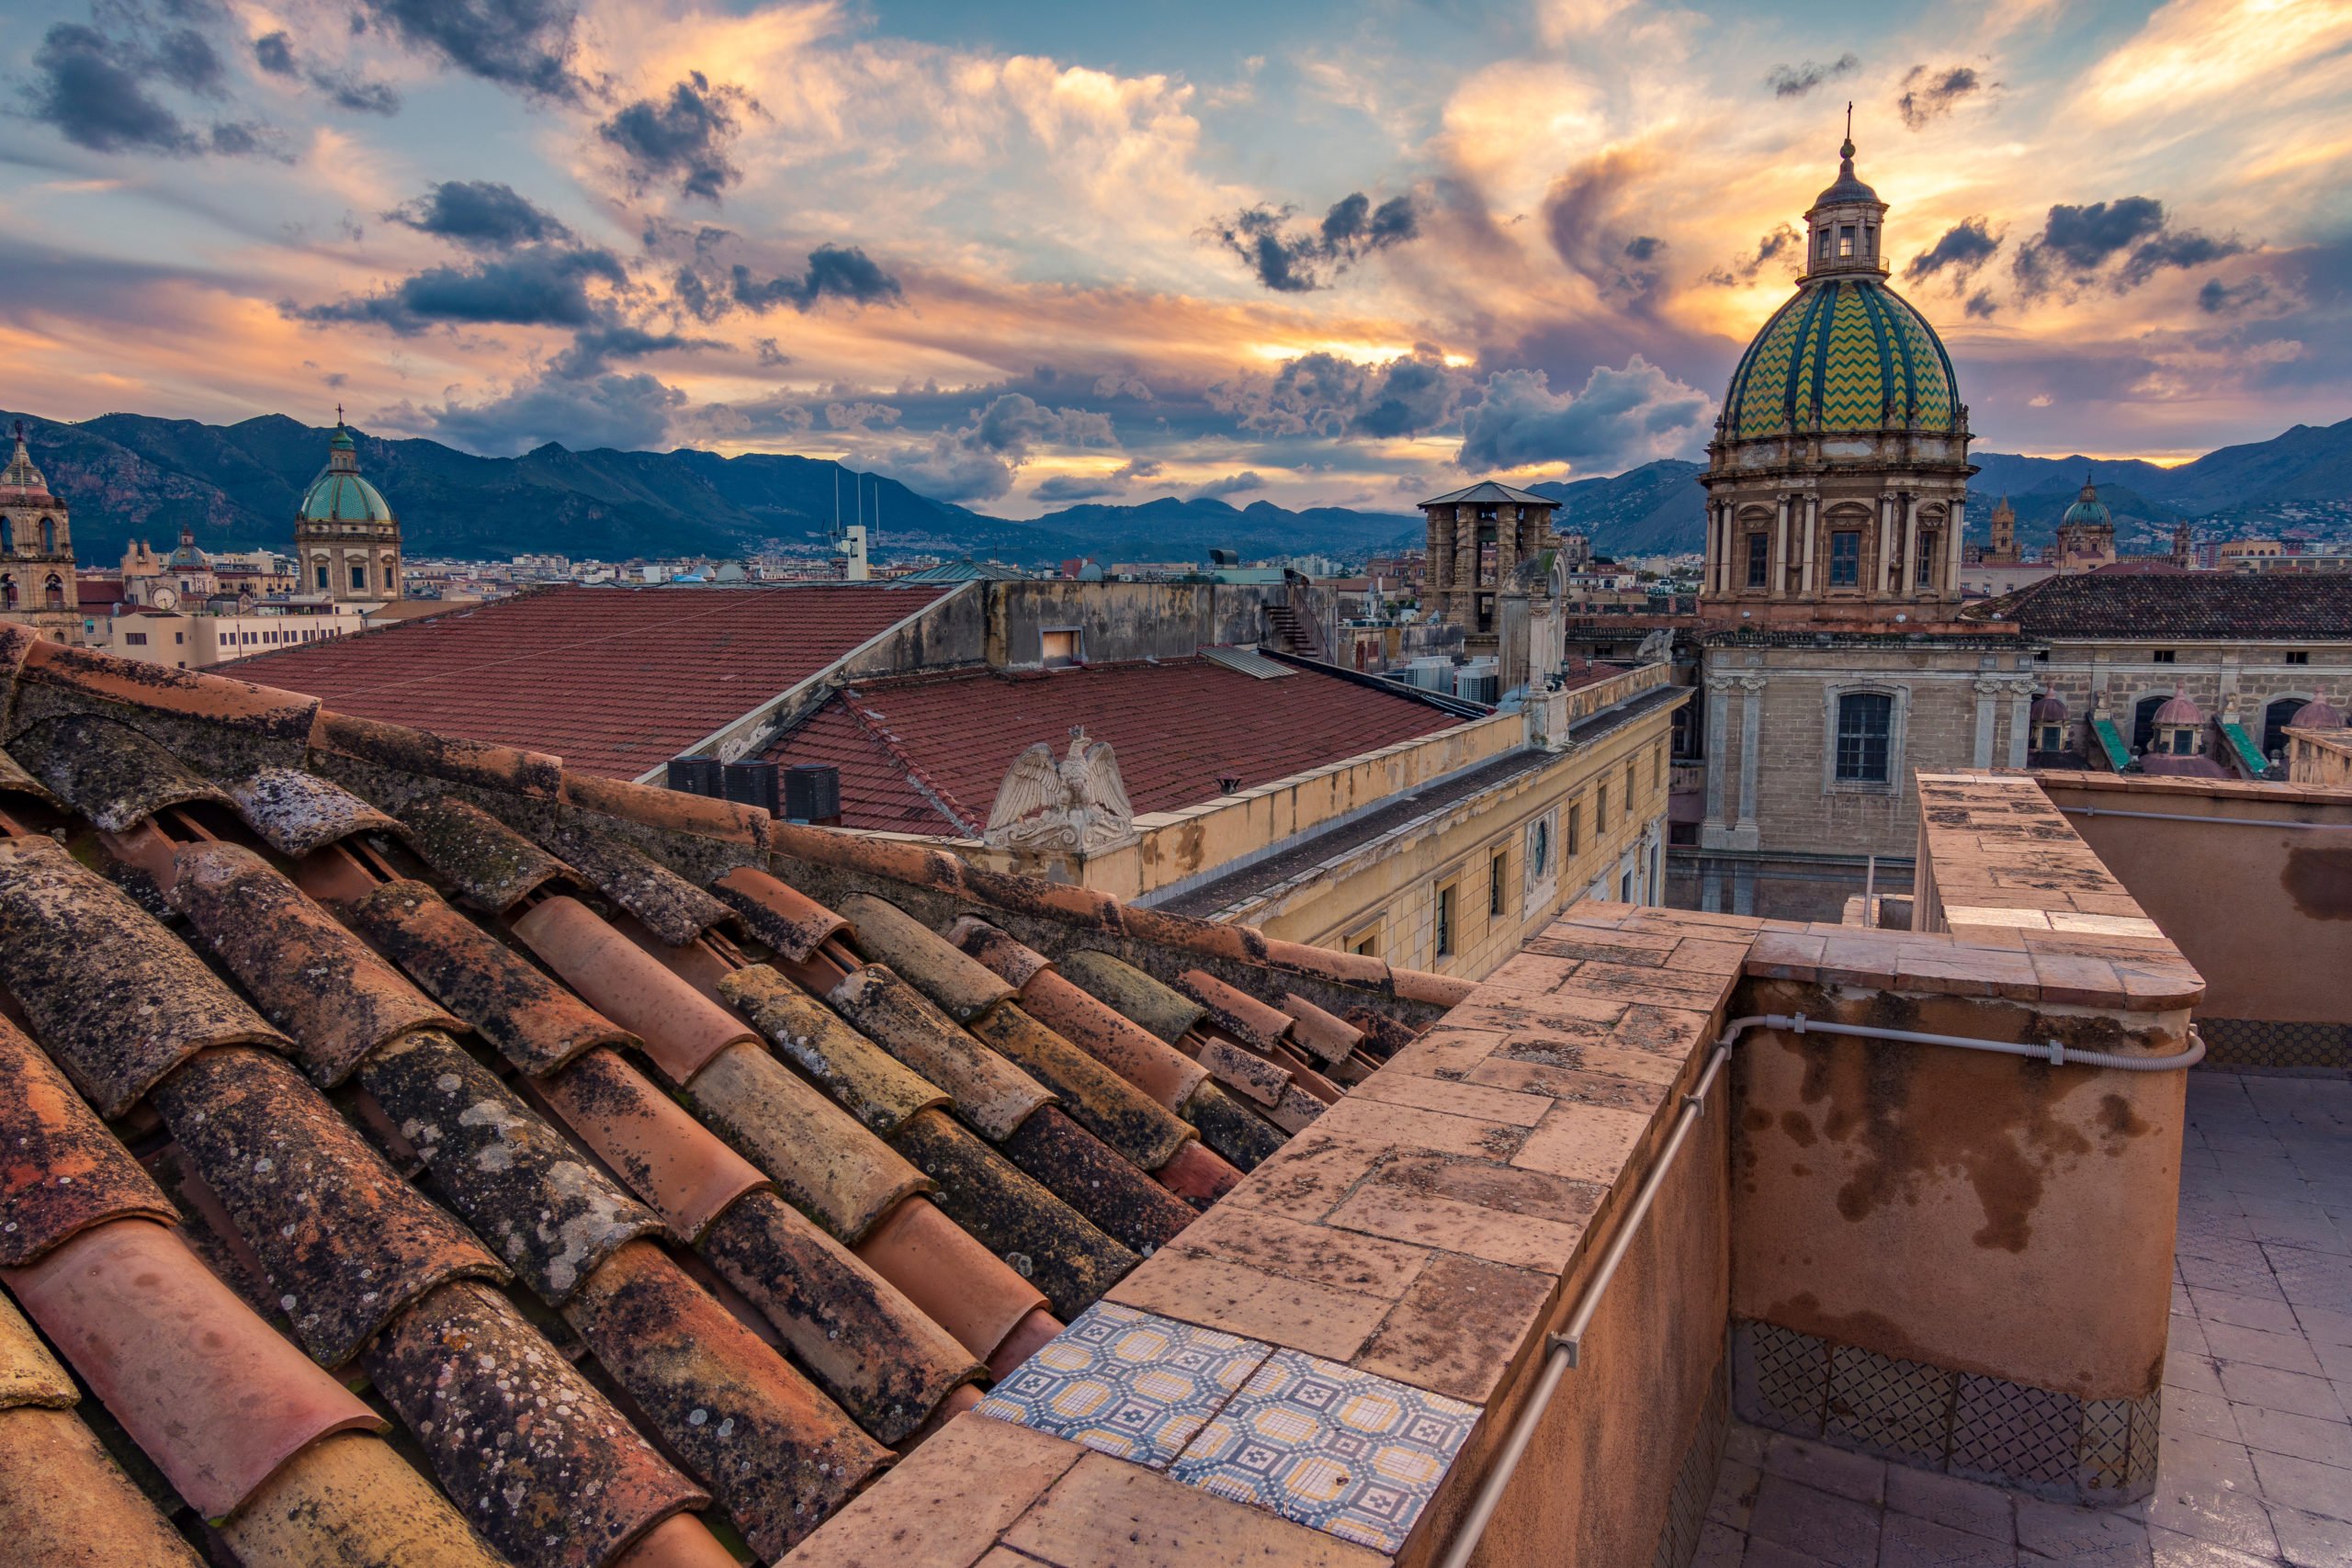 Discover The City Of Palermo On Our Palermo Wine Tasting Tour